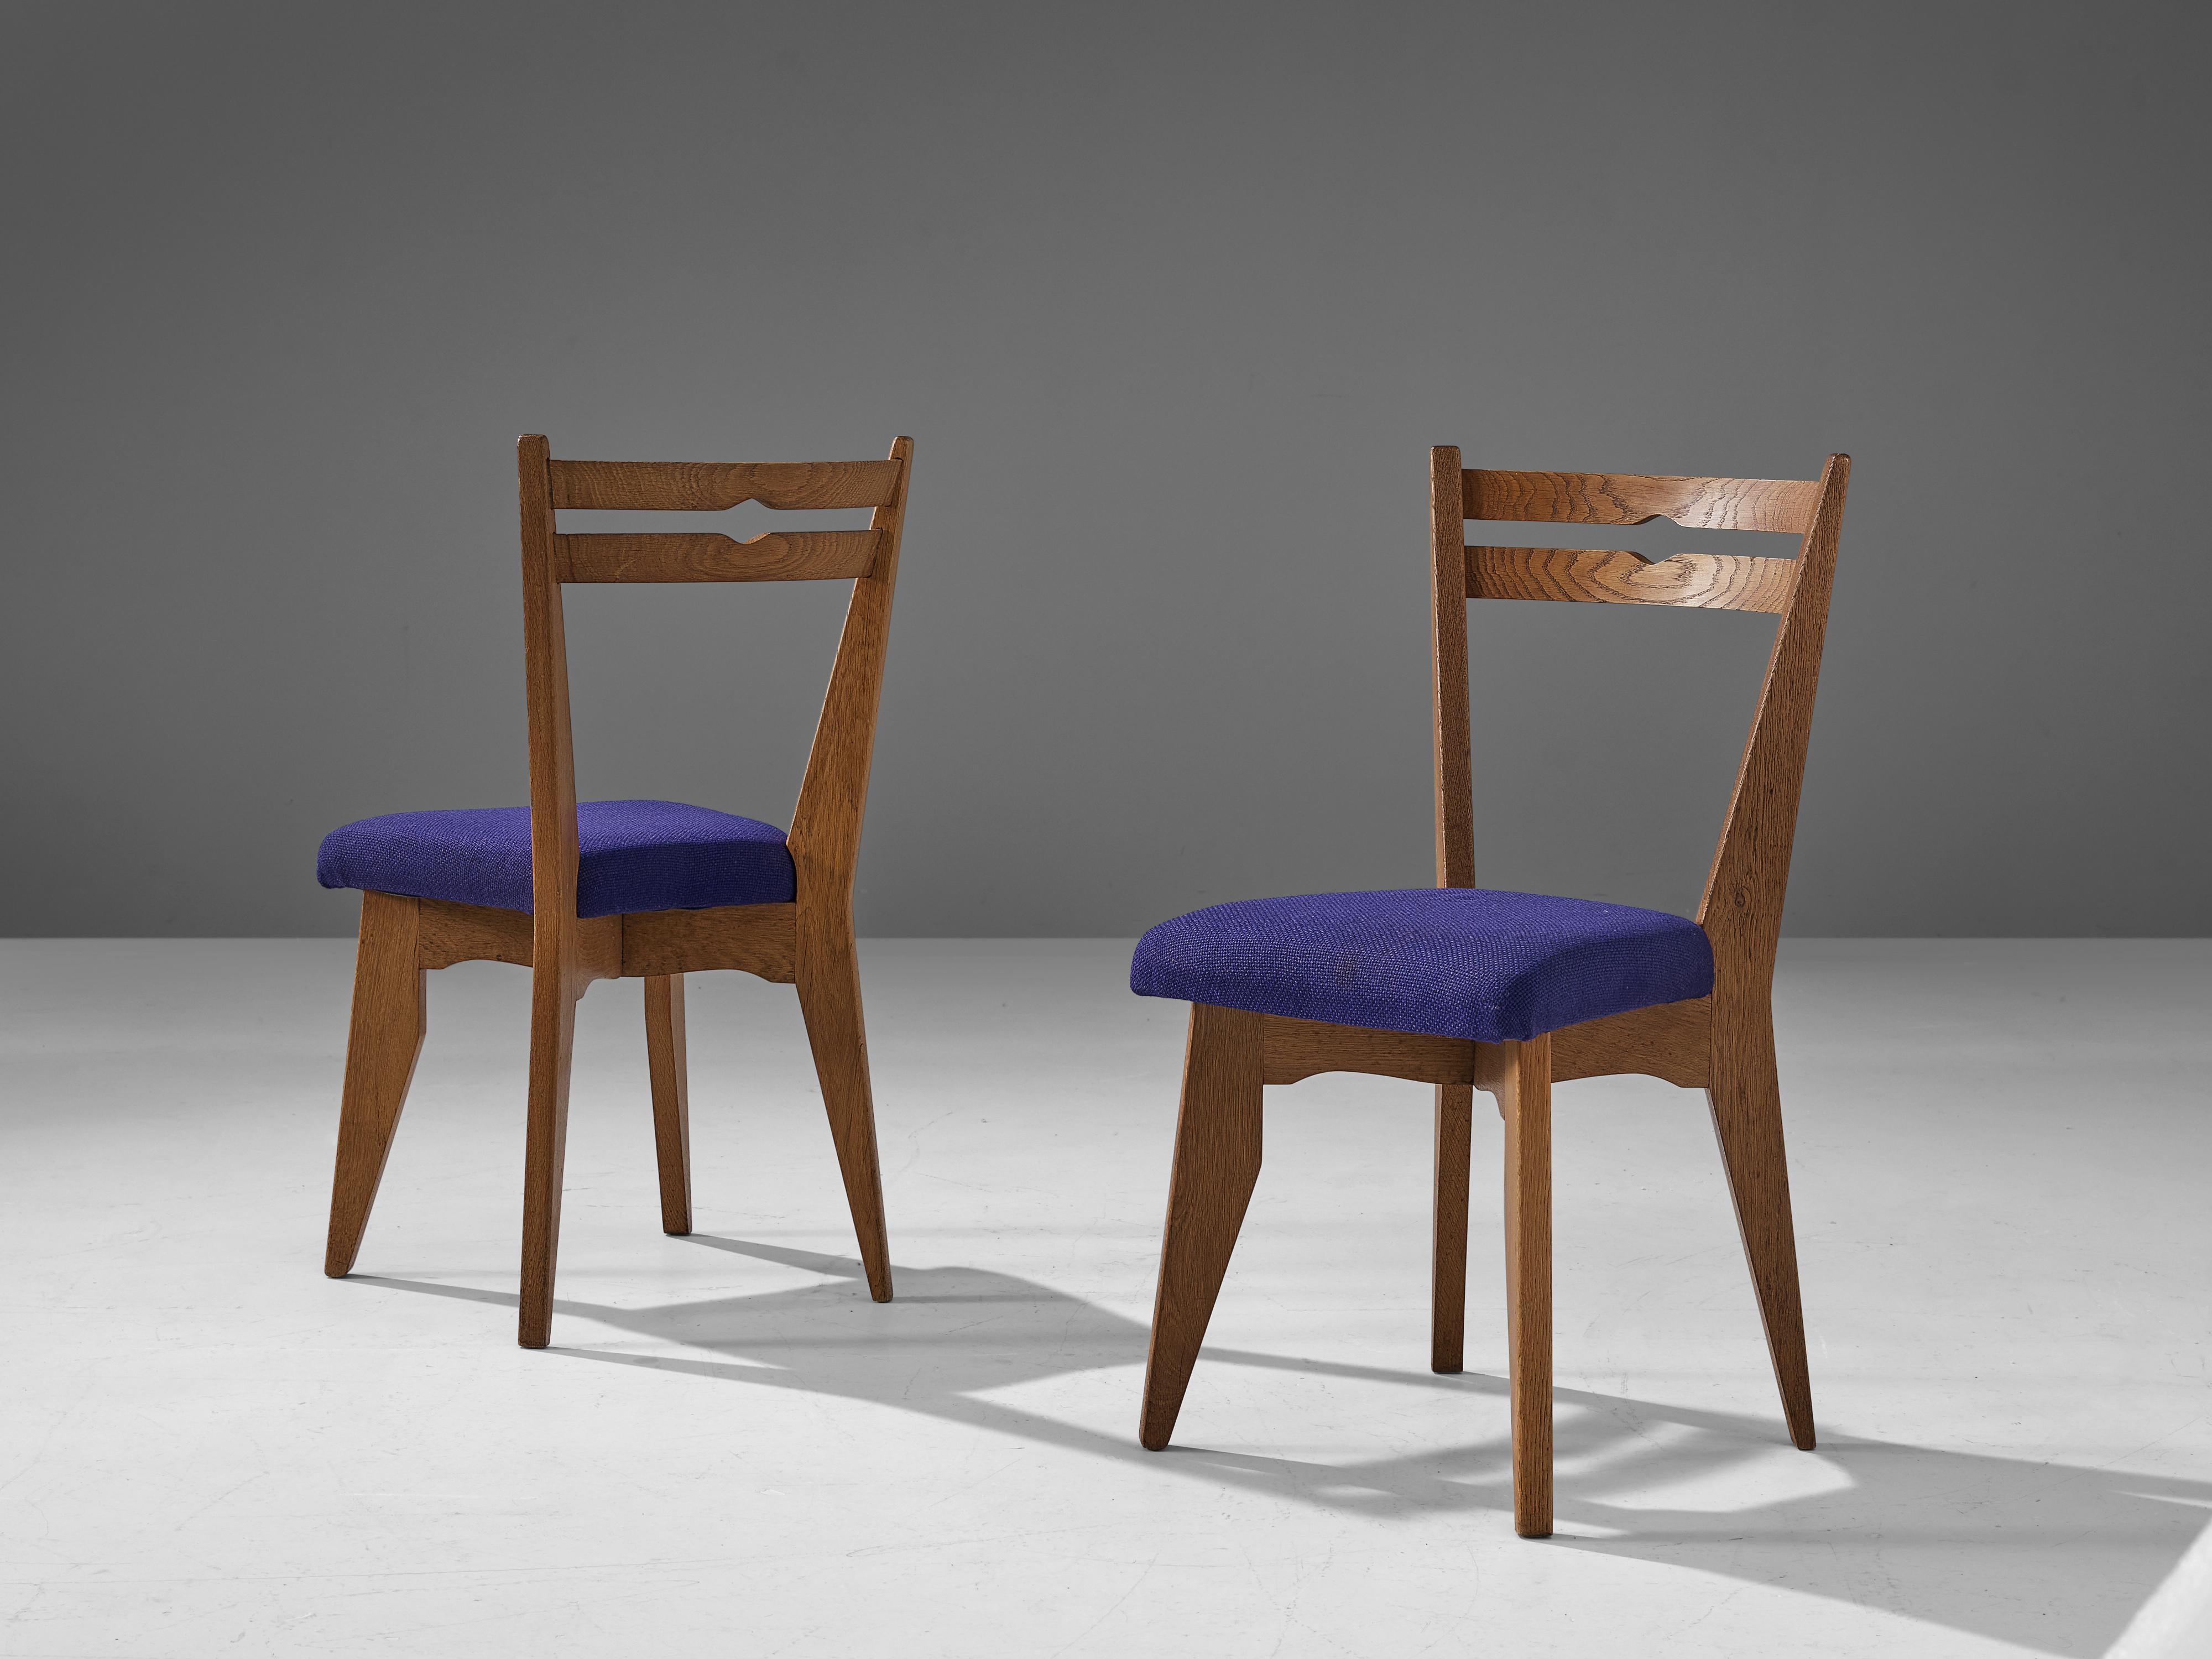 Guillerme & Chambron, pair of dining chairs, solid oak, fabric upholstery, France, 1960s

These dining chairs in solid oak are designed by the French designer duo Jacques Chambron and Robert Guillerme. On four tapered legs rests the seating with a